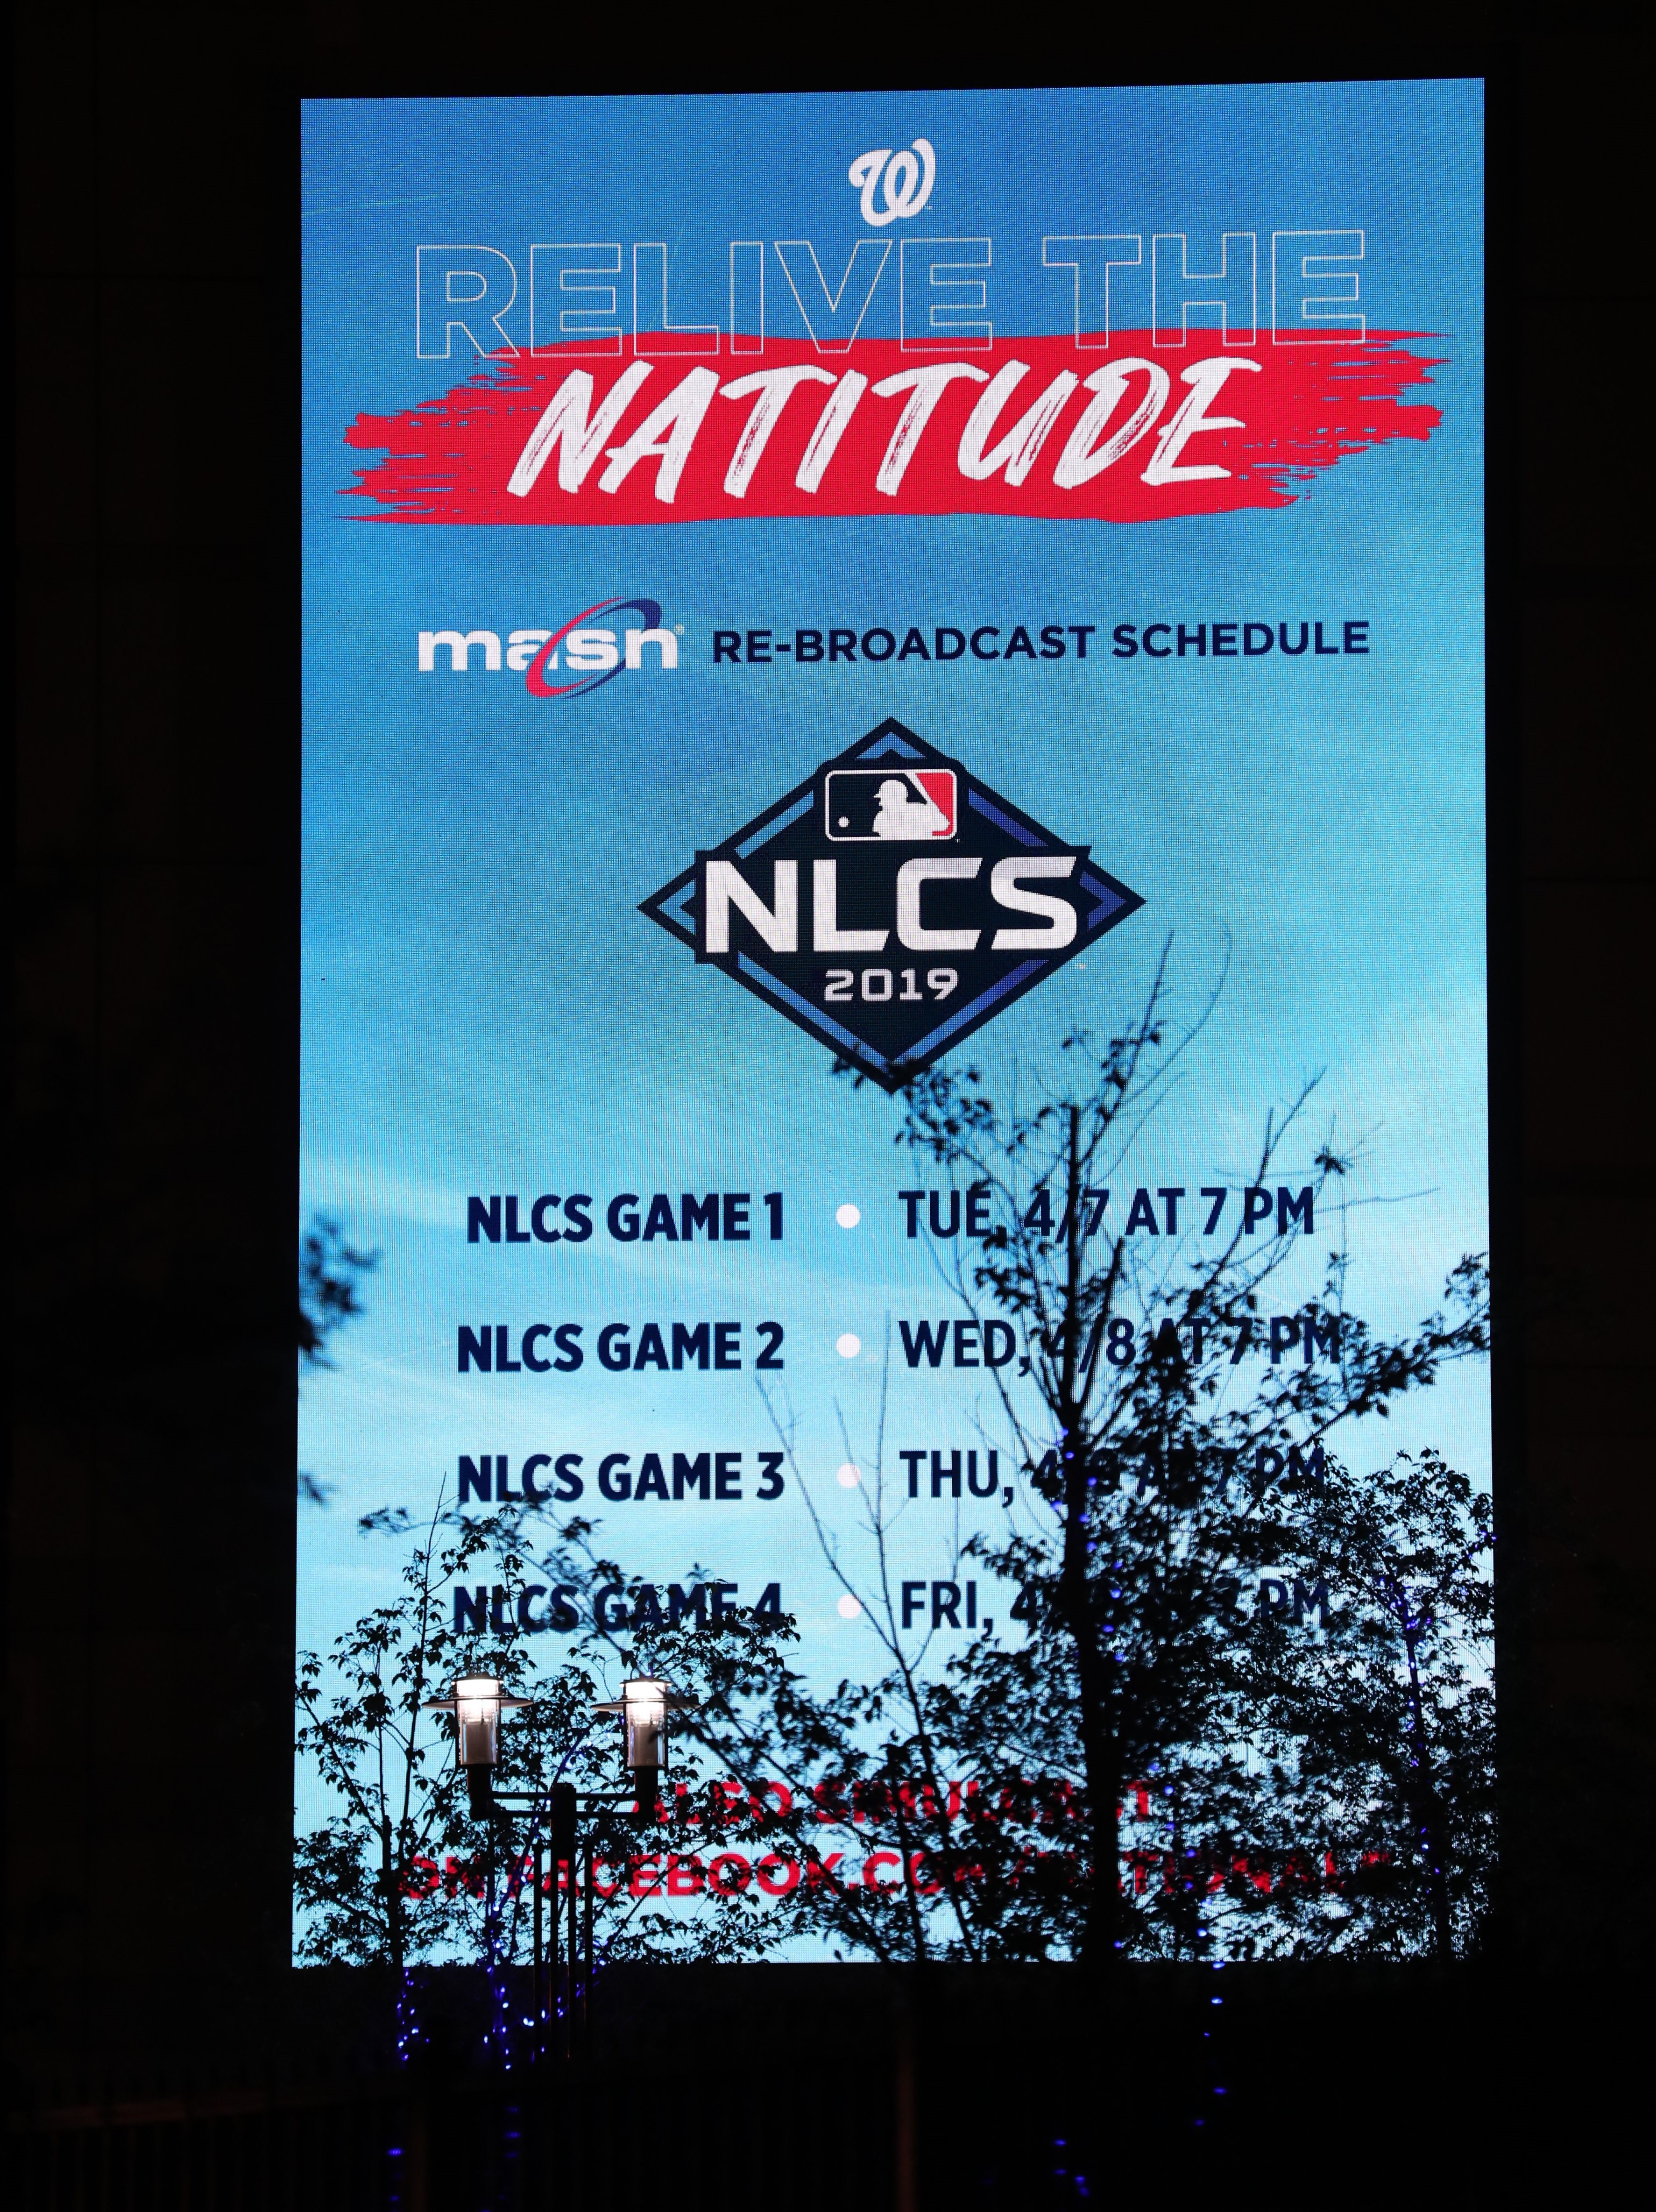 Join us for Game 2 of the NLCS on Scherzday! | TalkNats.com